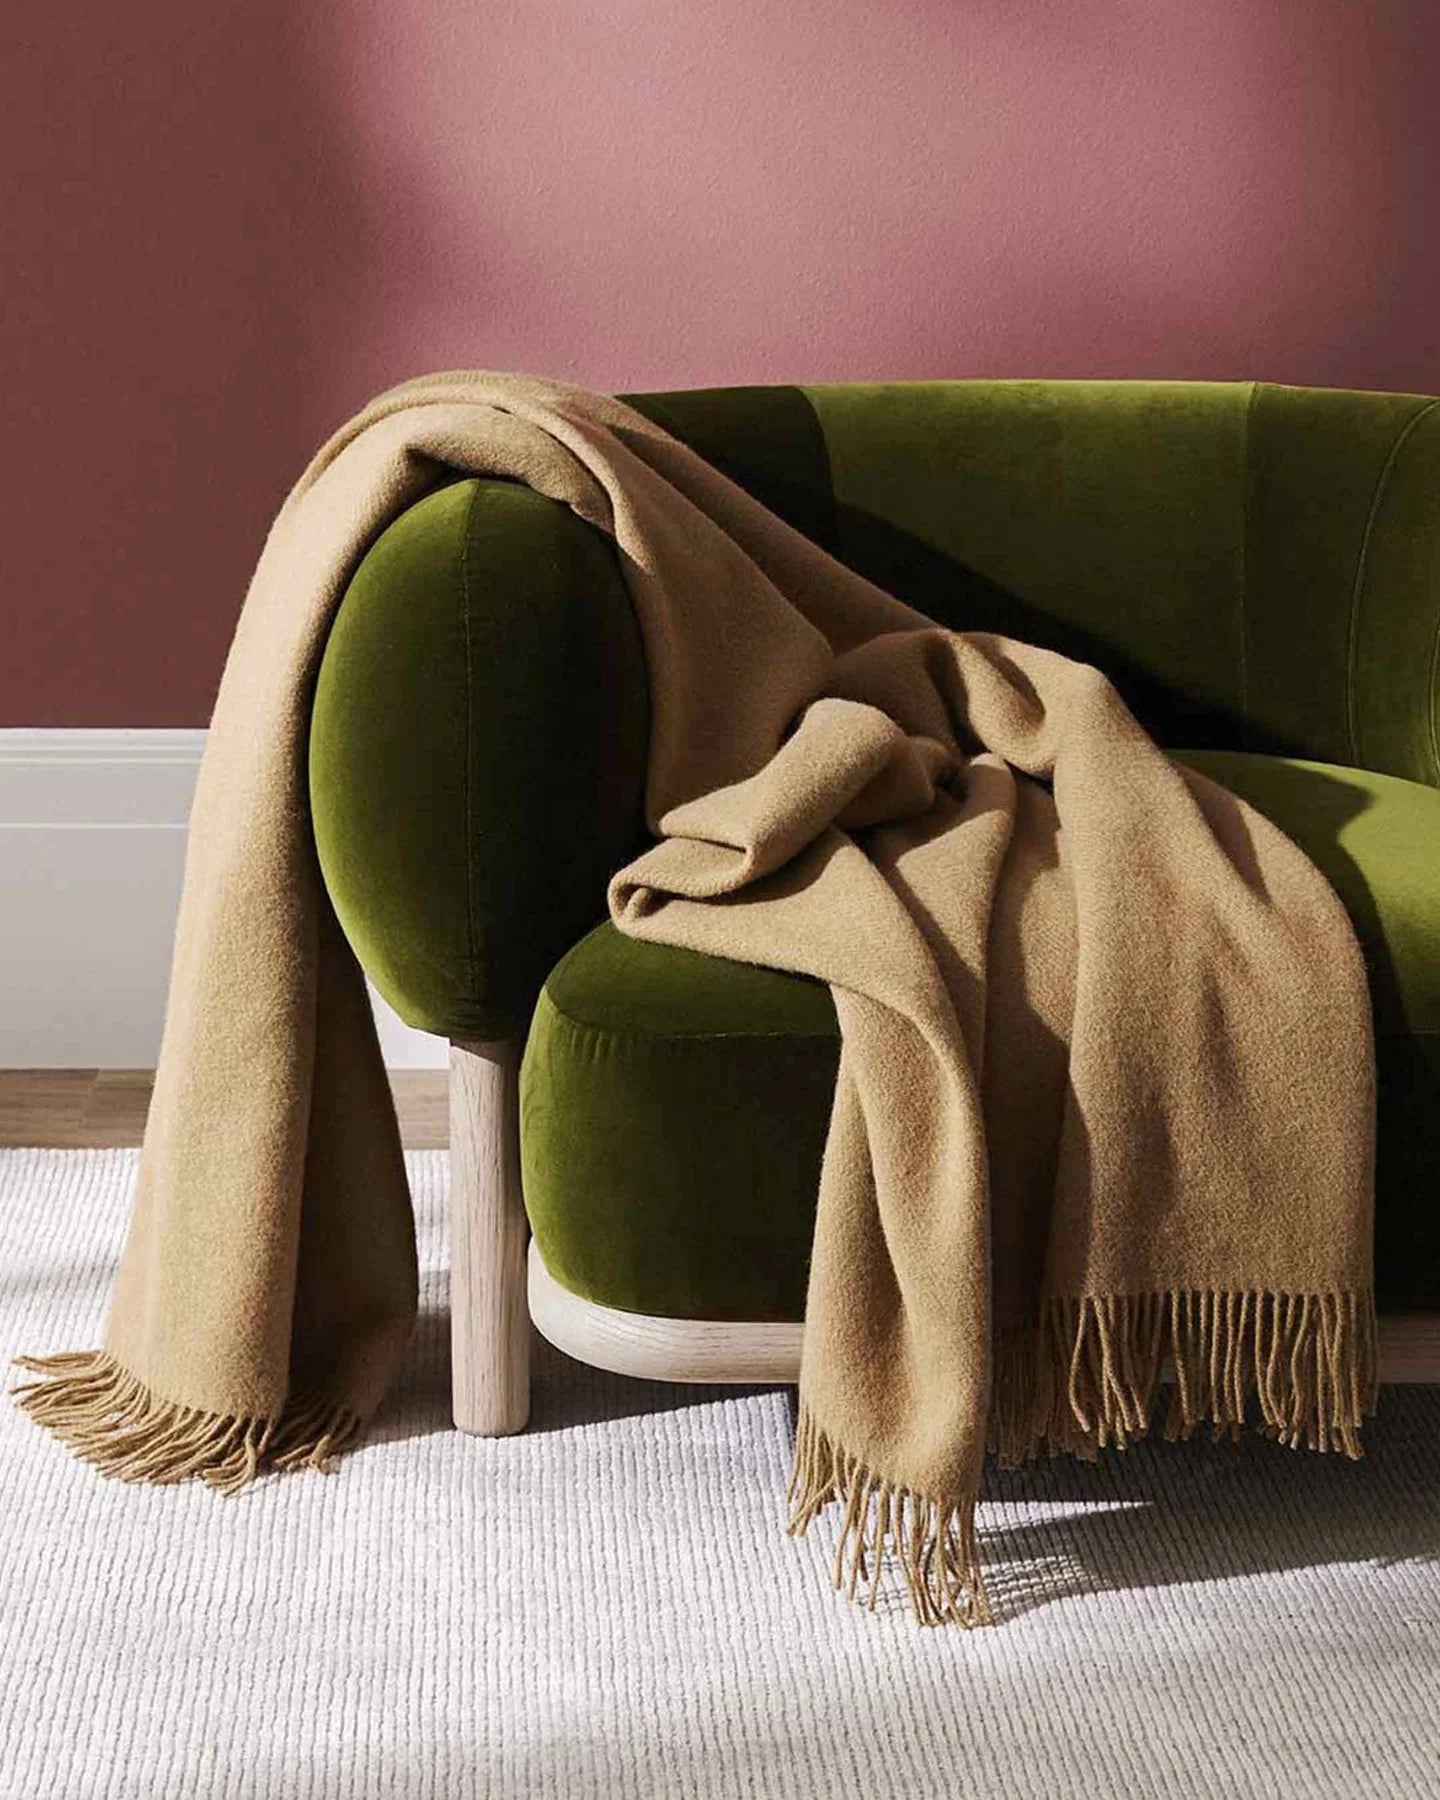 Made from 100% New Zealand lambswool, Nevis throw blankets in camel are simply luxurious. All of our throws make the perfect companion over cooler days and nights, and can also be enjoyed outdoors